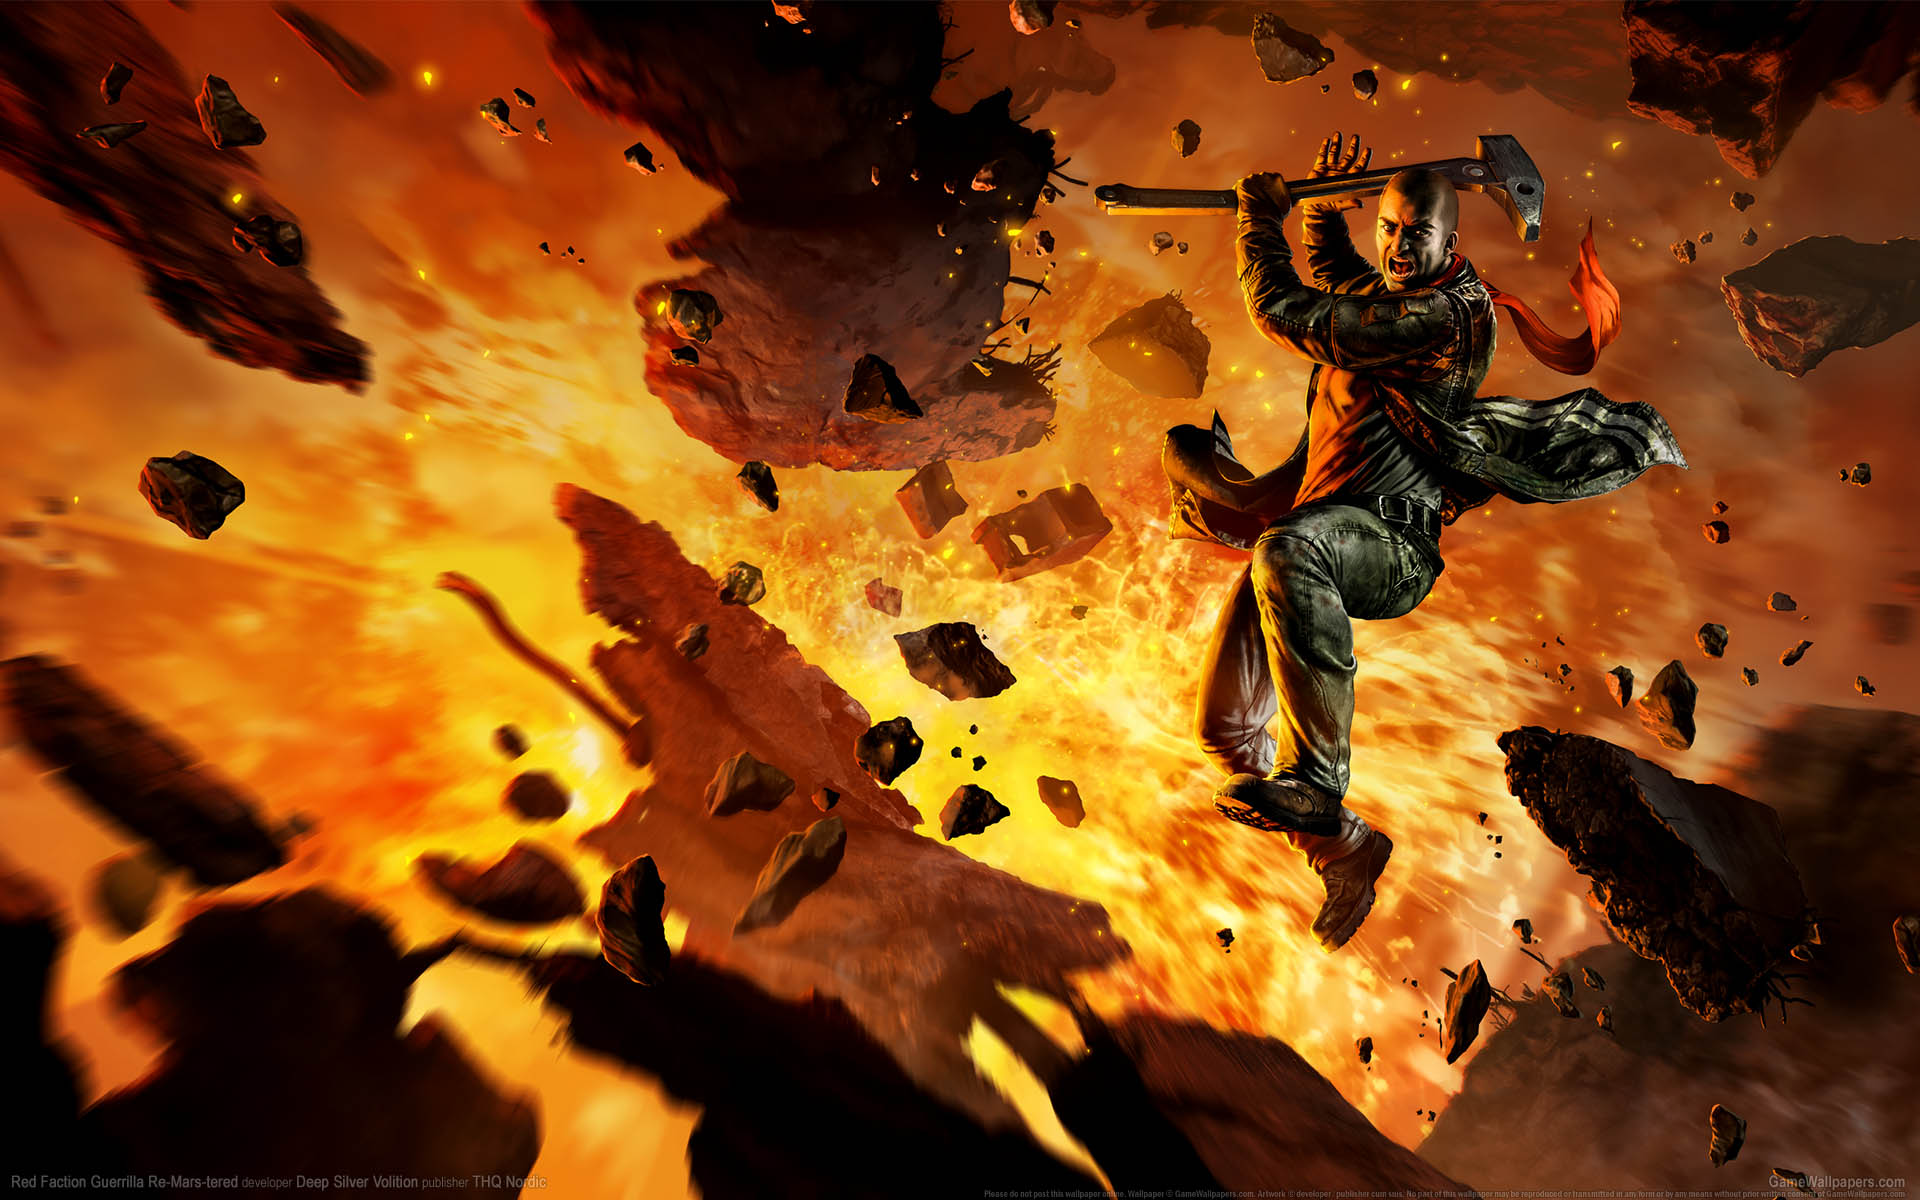 Red Faction: Guerrilla Re-Mars-tered achtergrond 01 1920x1200